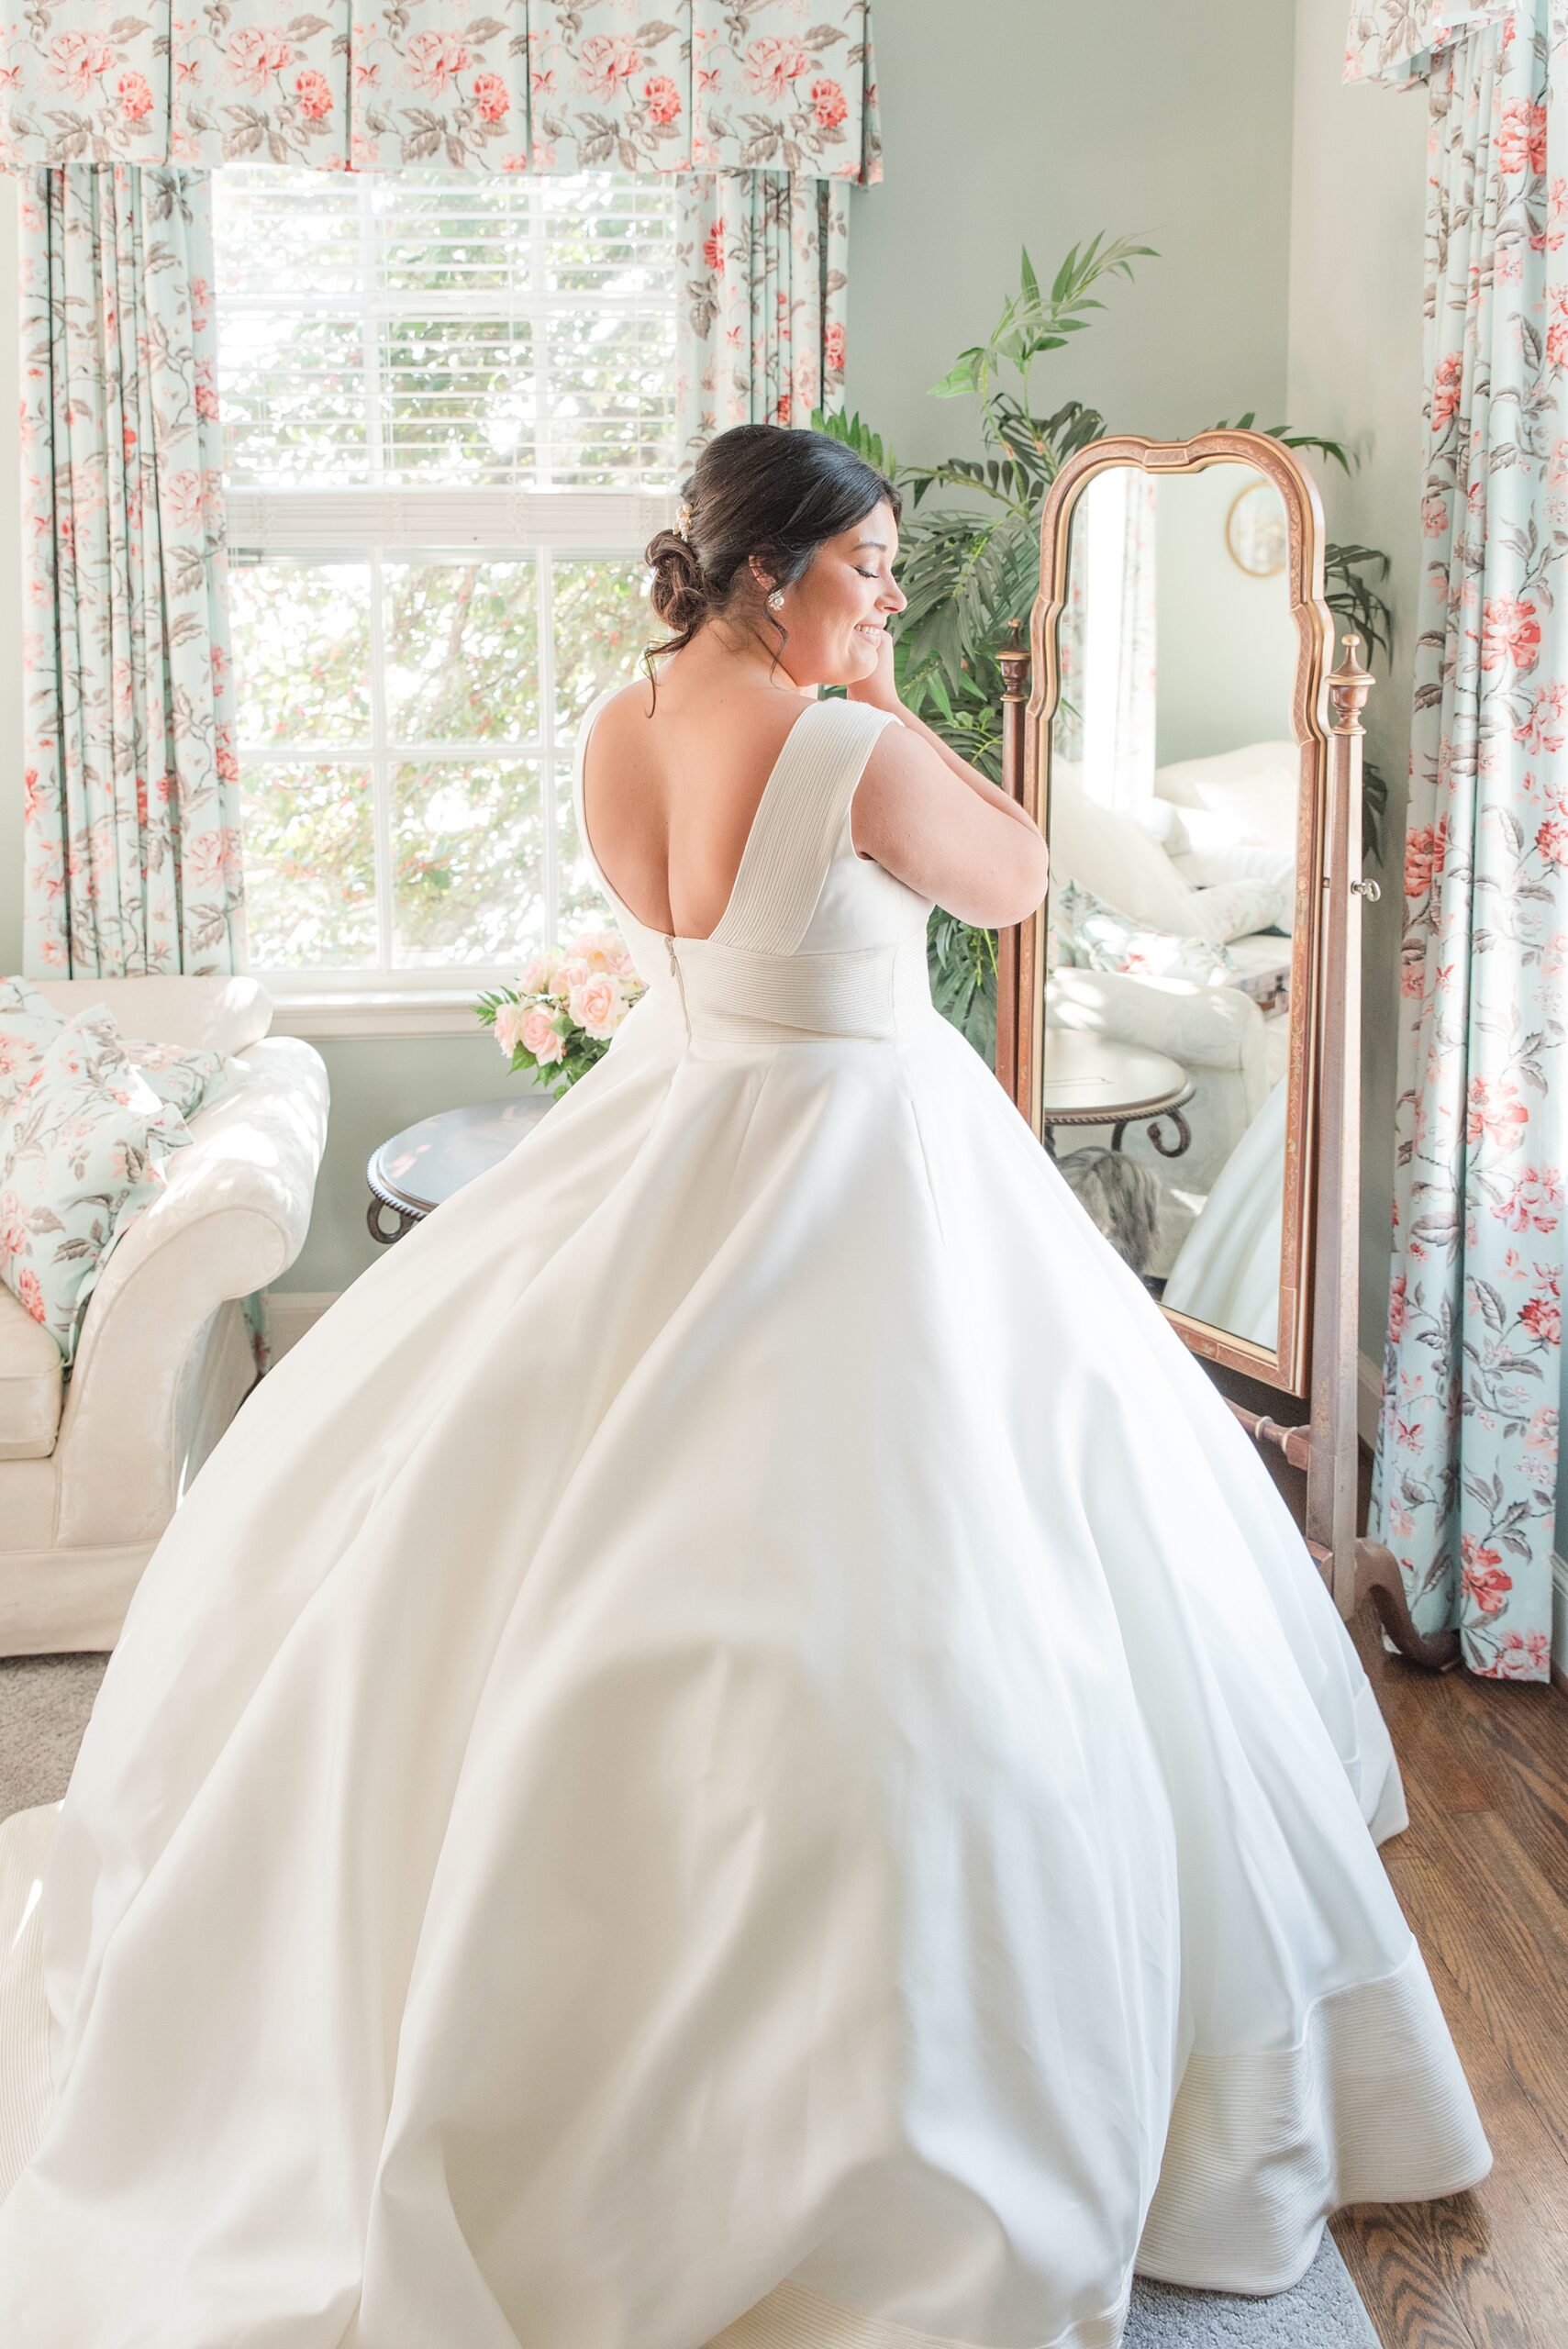 A bride stands in a tall mirror in her dress adjusting an earring